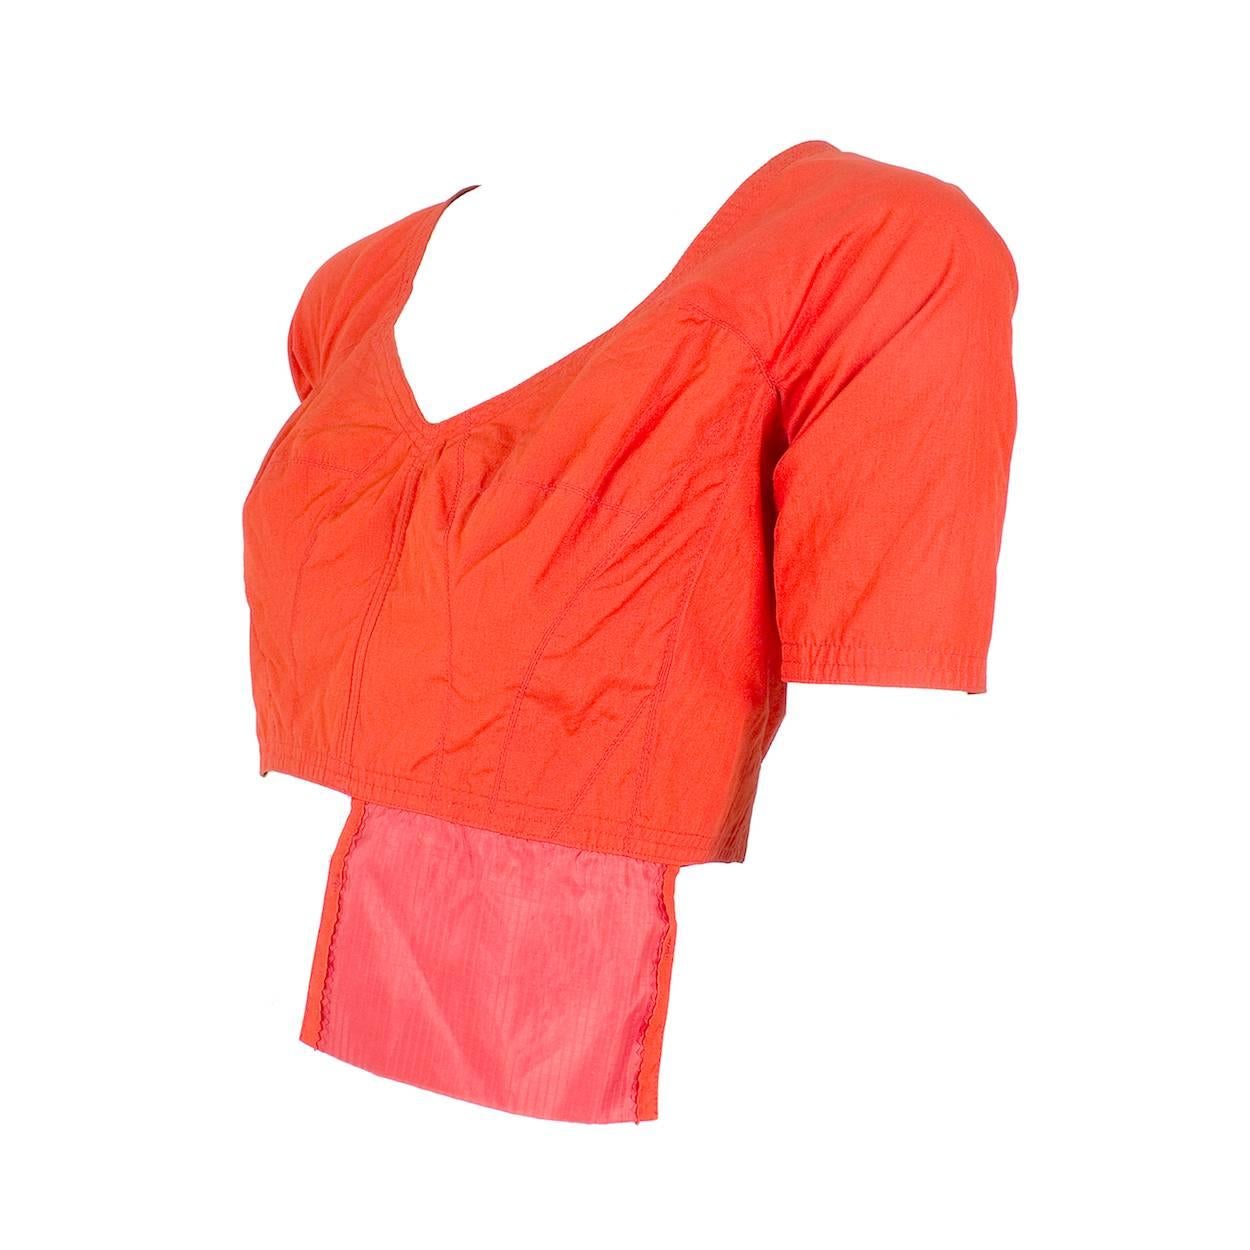 Red Jean Paul Gaultier Orange Cropped Shirt with Open Back circa 1990s